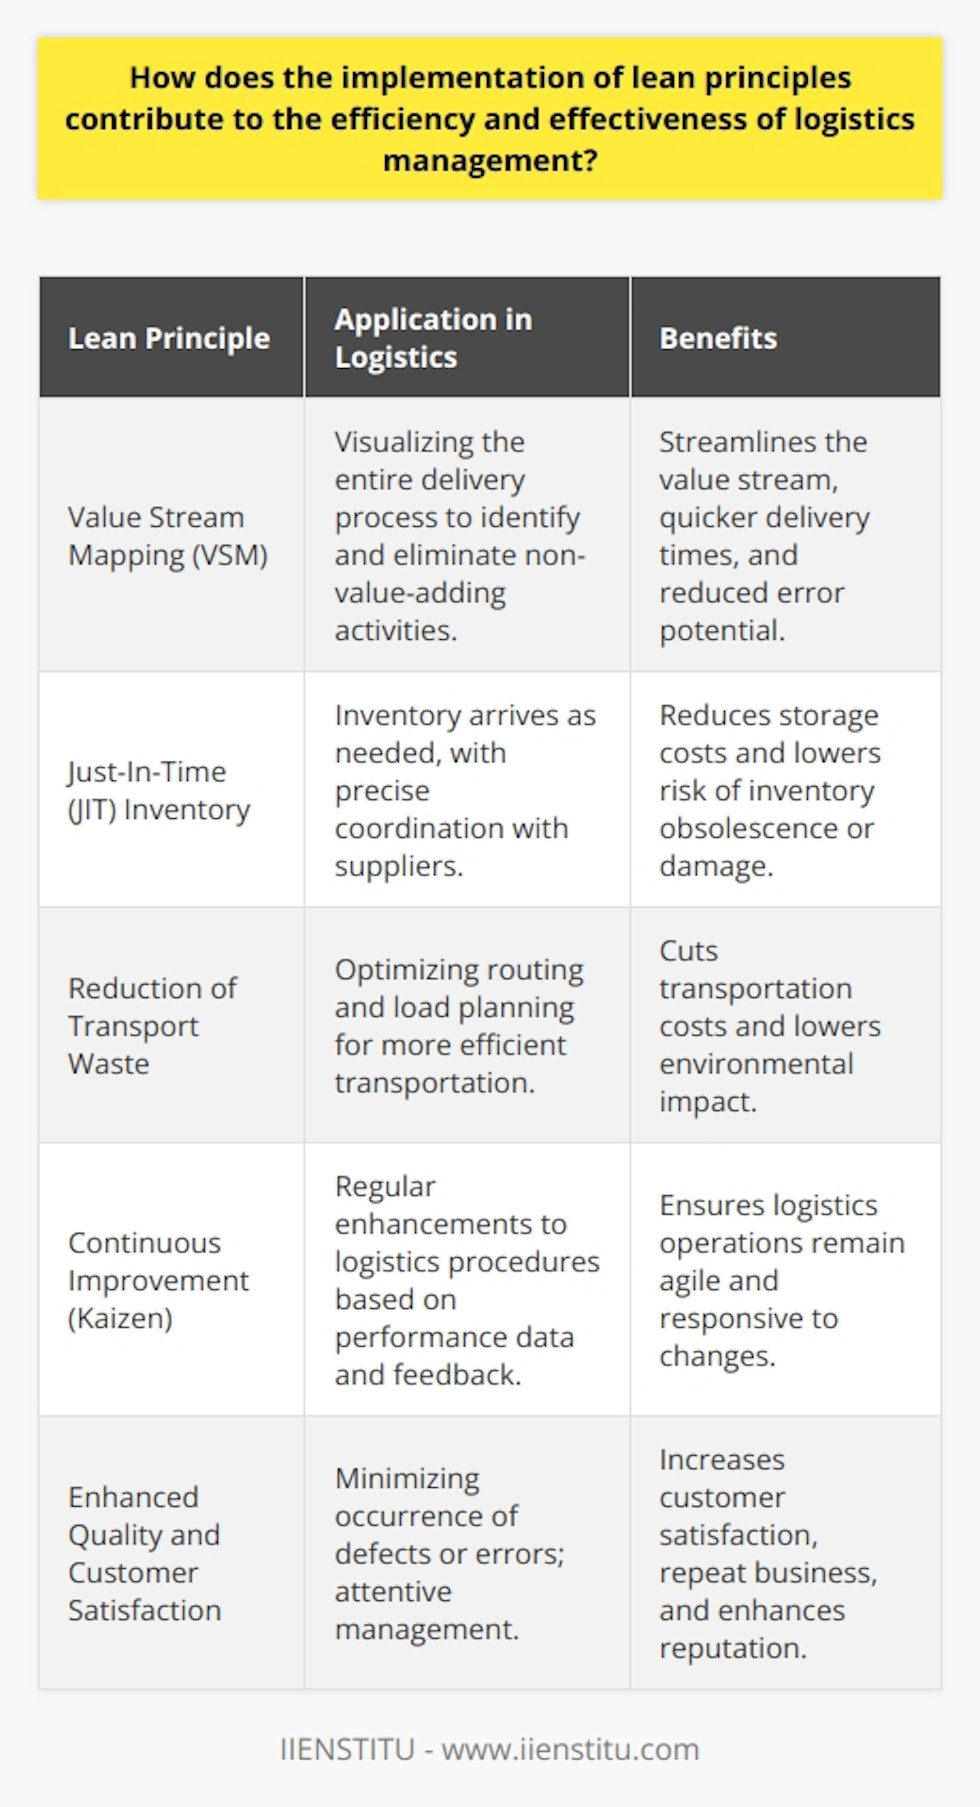 The implementation of lean principles within logistics management has become a transformative approach to enhancing supply chain efficiency and customer value. By leveraging these principles, logistical processes are refined to reduce waste—defined within lean as anything that does not add value to the customer—while simultaneously improving the overall flow of goods from supplier to customer.Lean principles, which originated in the manufacturing sector, are particularly effective when applied to logistics. The core lean practices such as value stream mapping, continuous improvement, and flow optimization help identify and mitigate inefficiencies within the supply chain.Value Stream Mapping (VSM)In logistics, Value Stream Mapping is a tool used to visualize the entire process of delivering a product or service from start to finish. By mapping out all steps, logistics managers can identify non-value-adding activities that might contribute to delays, such as excessive handling or unnecessary transportation. Eliminating or improving these activities can streamline the value stream, enabling quicker delivery times and reducing potential for errors.Just-In-Time (JIT) InventoryJIT, one of the key elements of lean logistics, emphasizes having inventory arrive as it is needed rather than being held in storage. Rather than maintaining high levels of stock, JIT requires precise coordination with suppliers to ensure materials arrive just in time for use. This approach reduces the cost of storage and lowers the risk of inventory obsolescence or damage.Reduction of Transport WasteLean principles advocate for the reduction of transport waste by optimizing routing and load planning. Efficient transportation means fewer trips, which not only cuts costs but also reduces the environmental impact of logistics operations. Intelligent route planning can ensure that goods are moved directly from point A to point B without unnecessary detours, saving time and fuel.Continuous Improvement (Kaizen)Kaizen, or continuous improvement, involves ongoing efforts to improve all functions and processes. In the context of logistics, this means regularly analyzing performance data, gathering frontline feedback, and implementing iterative enhancements to logistics procedures. By fostering a culture of continuous improvement, organizations ensure their logistics operations remain agile and responsive to changes in demand or market conditions.Enhanced Quality and Customer SatisfactionApplying lean principles helps to minimize the occurrence of defects or errors in logistics processes, as it encourages a more attentive and quality-focused management style. With improved quality comes greater customer satisfaction, as consumers receive their orders accurately, on-time, and in perfect condition. Satisfied customers are more likely to become repeat buyers and to recommend the service to others, thus enhancing the reputation and profitability of the logistics provider.In conclusion, the implementation of lean principles in logistics management serves as a strategic approach to refine supply chain operations, reduce wastage, and improve service delivery. An organization operating with lean logistics is well-equipped to adapt to changing market dynamics and stands to gain a competitive edge by delivering superior customer value. While various institutions provide insights and training on lean methodologies, those like IIENSTITU offer specialized courses that can help organizations and professionals deepen their understanding and application of lean principles within the realm of logistics management.